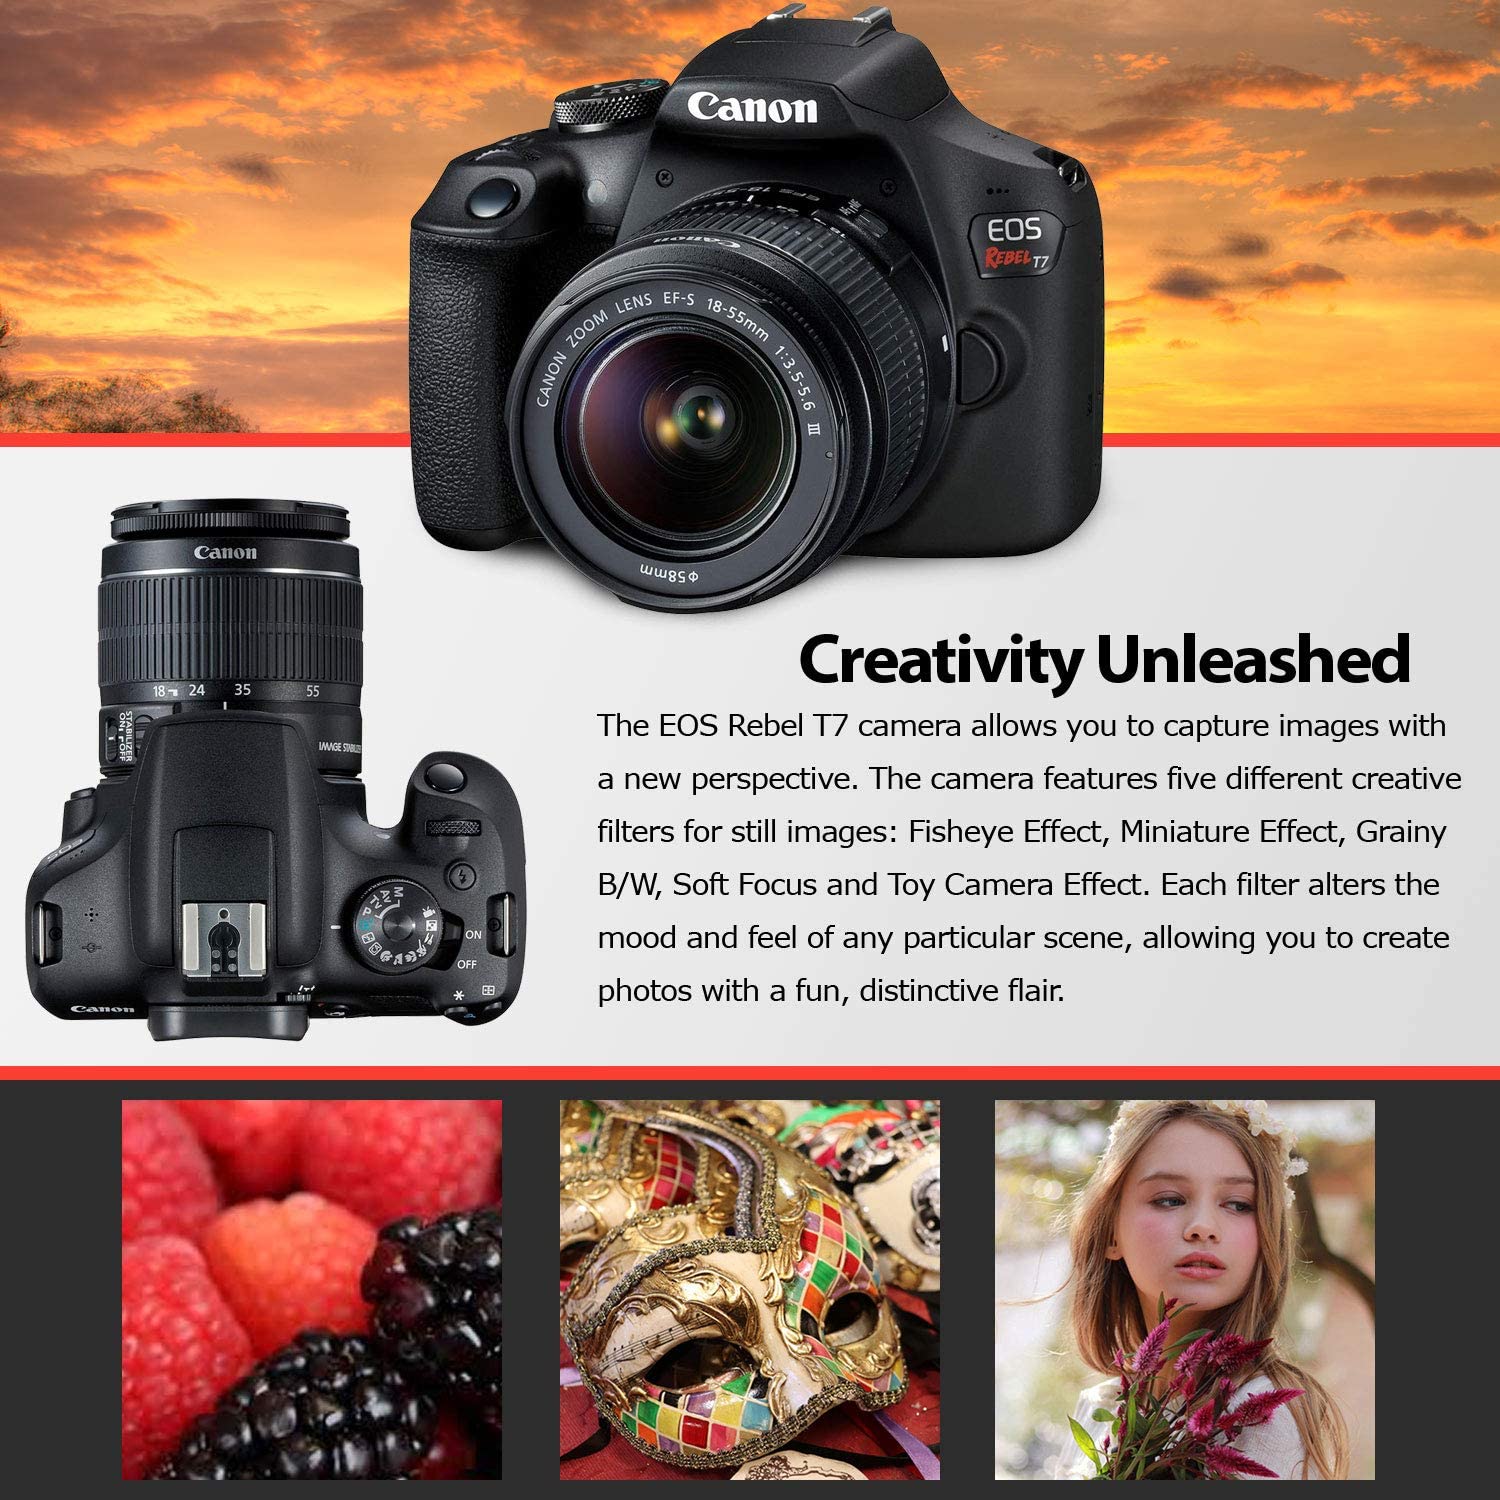 Canon Rebel T7 DSLR Camera with 18-55mm  Lens Kit and Carrying Case, Creative Filters, Cleaning Kit, and More - image 4 of 6